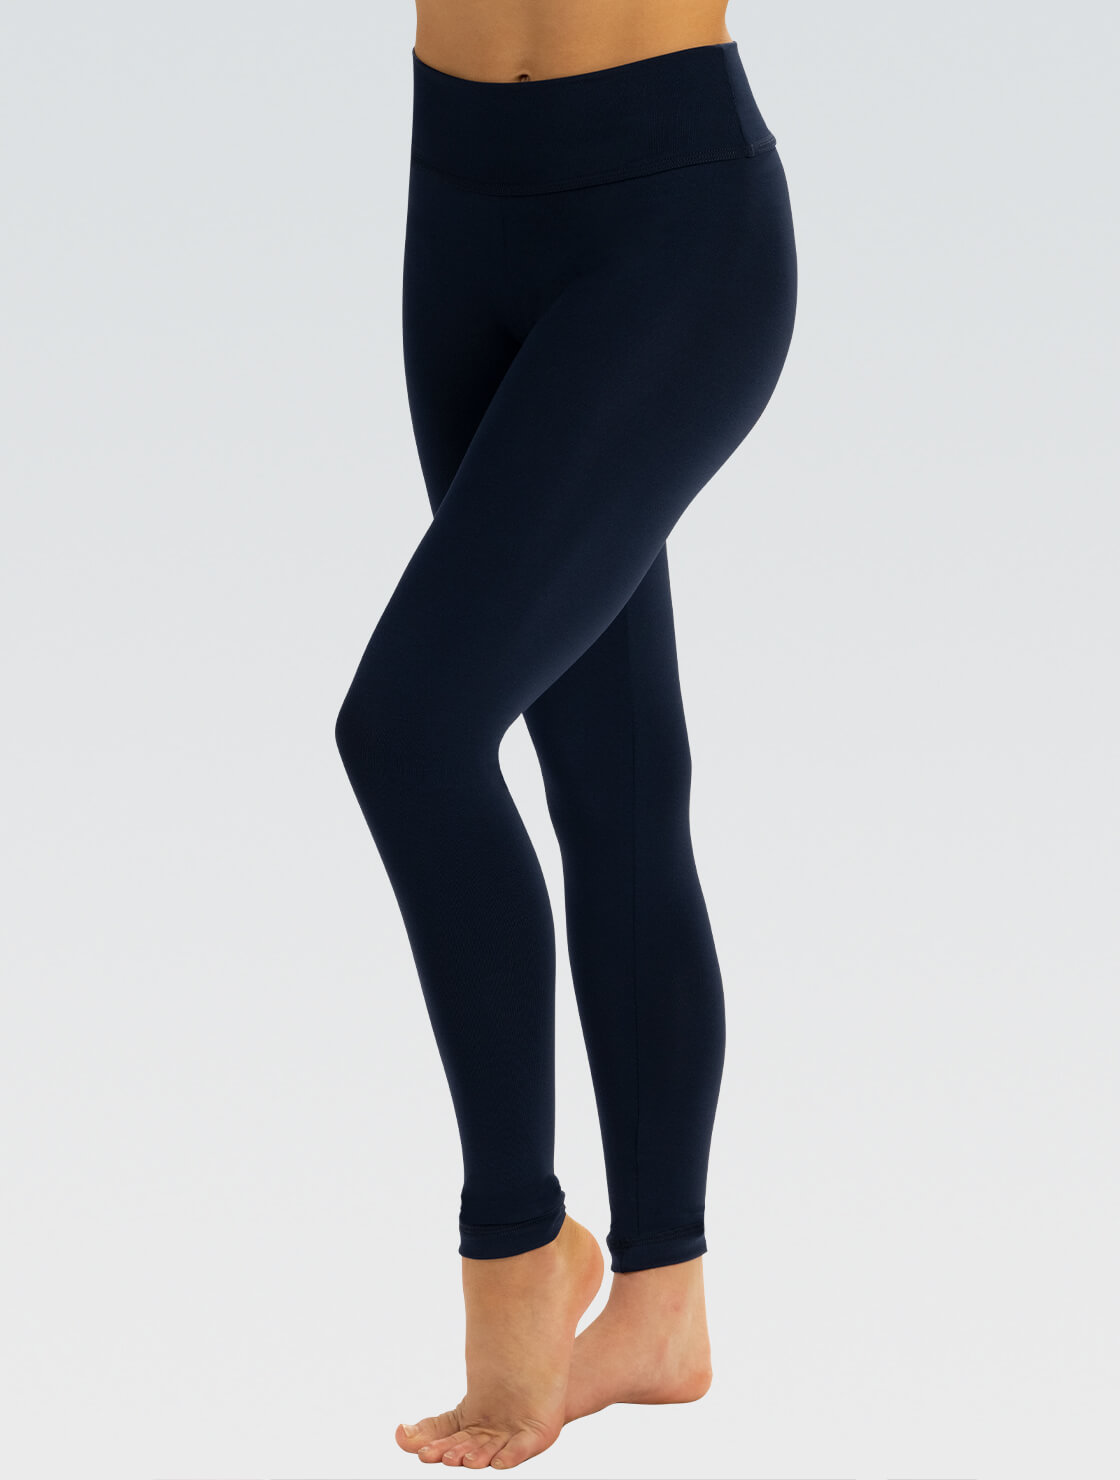 Exceptionally Stylish High Waist Compression Leggings at Low